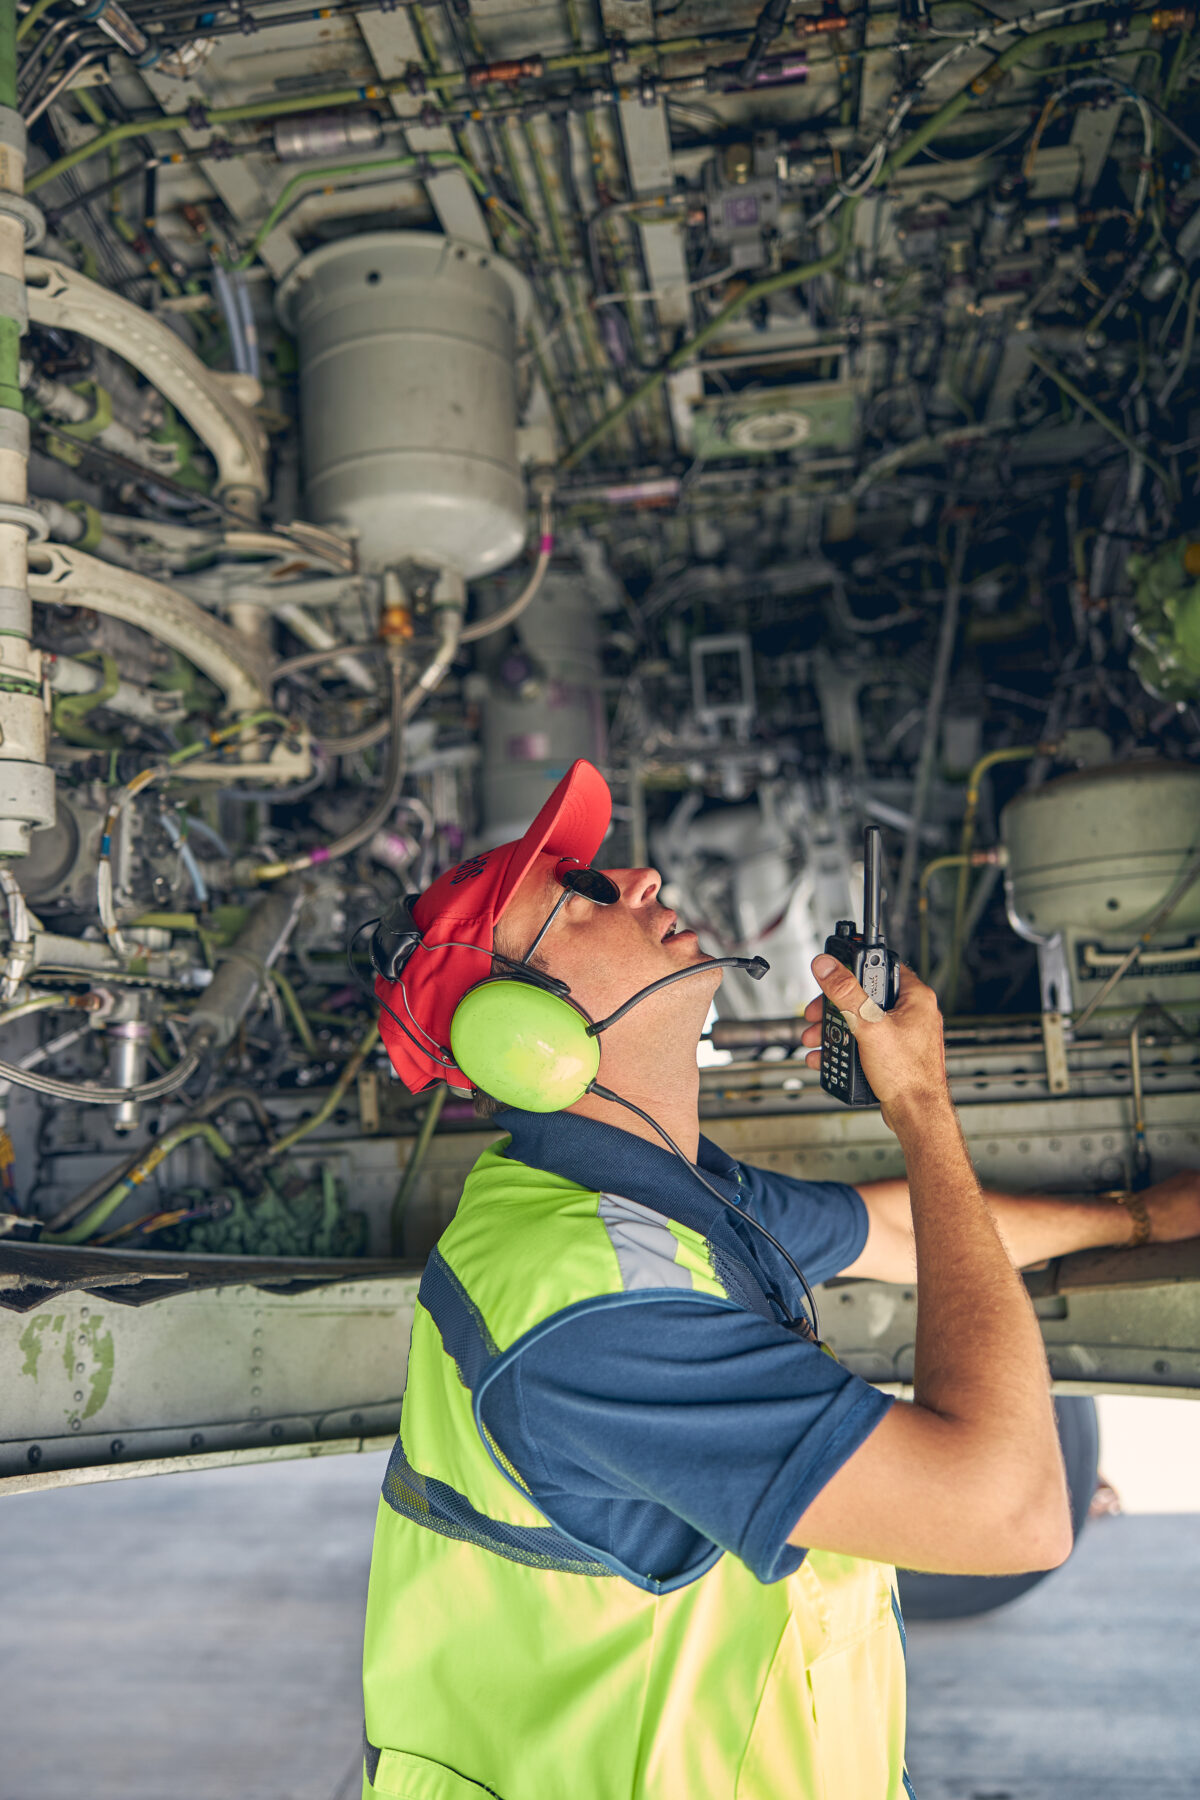 Incident reporting maintenance technician conducting safety inspections